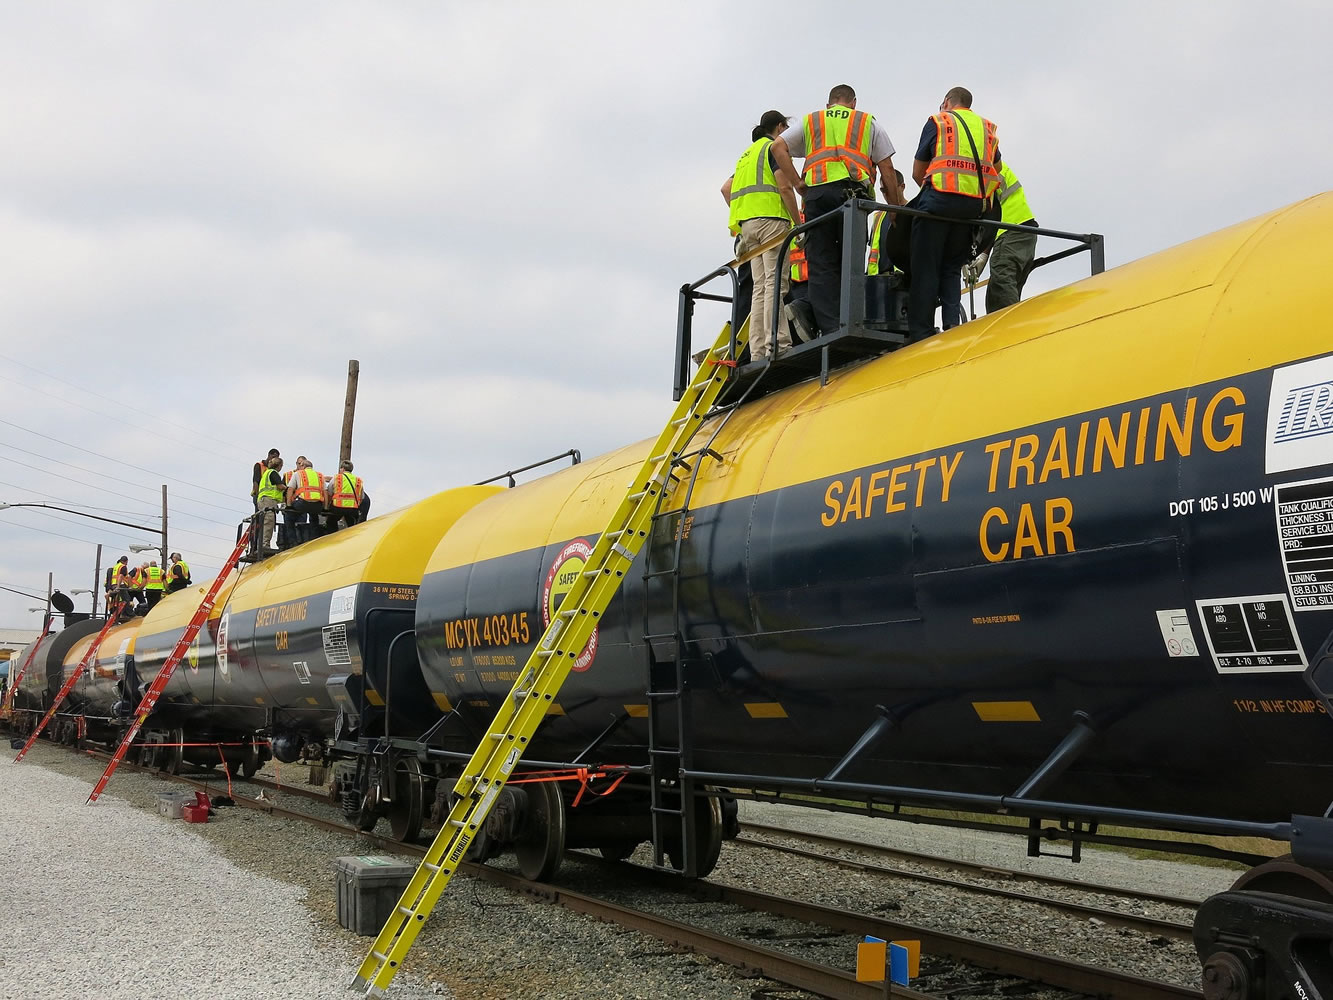 Virginia emergency responders learn about the types of railroad tank cars in a safety class Monday at a CSX yard in Richmond, Va. About 66 first responders, including firefighters, participated in the daylong event.